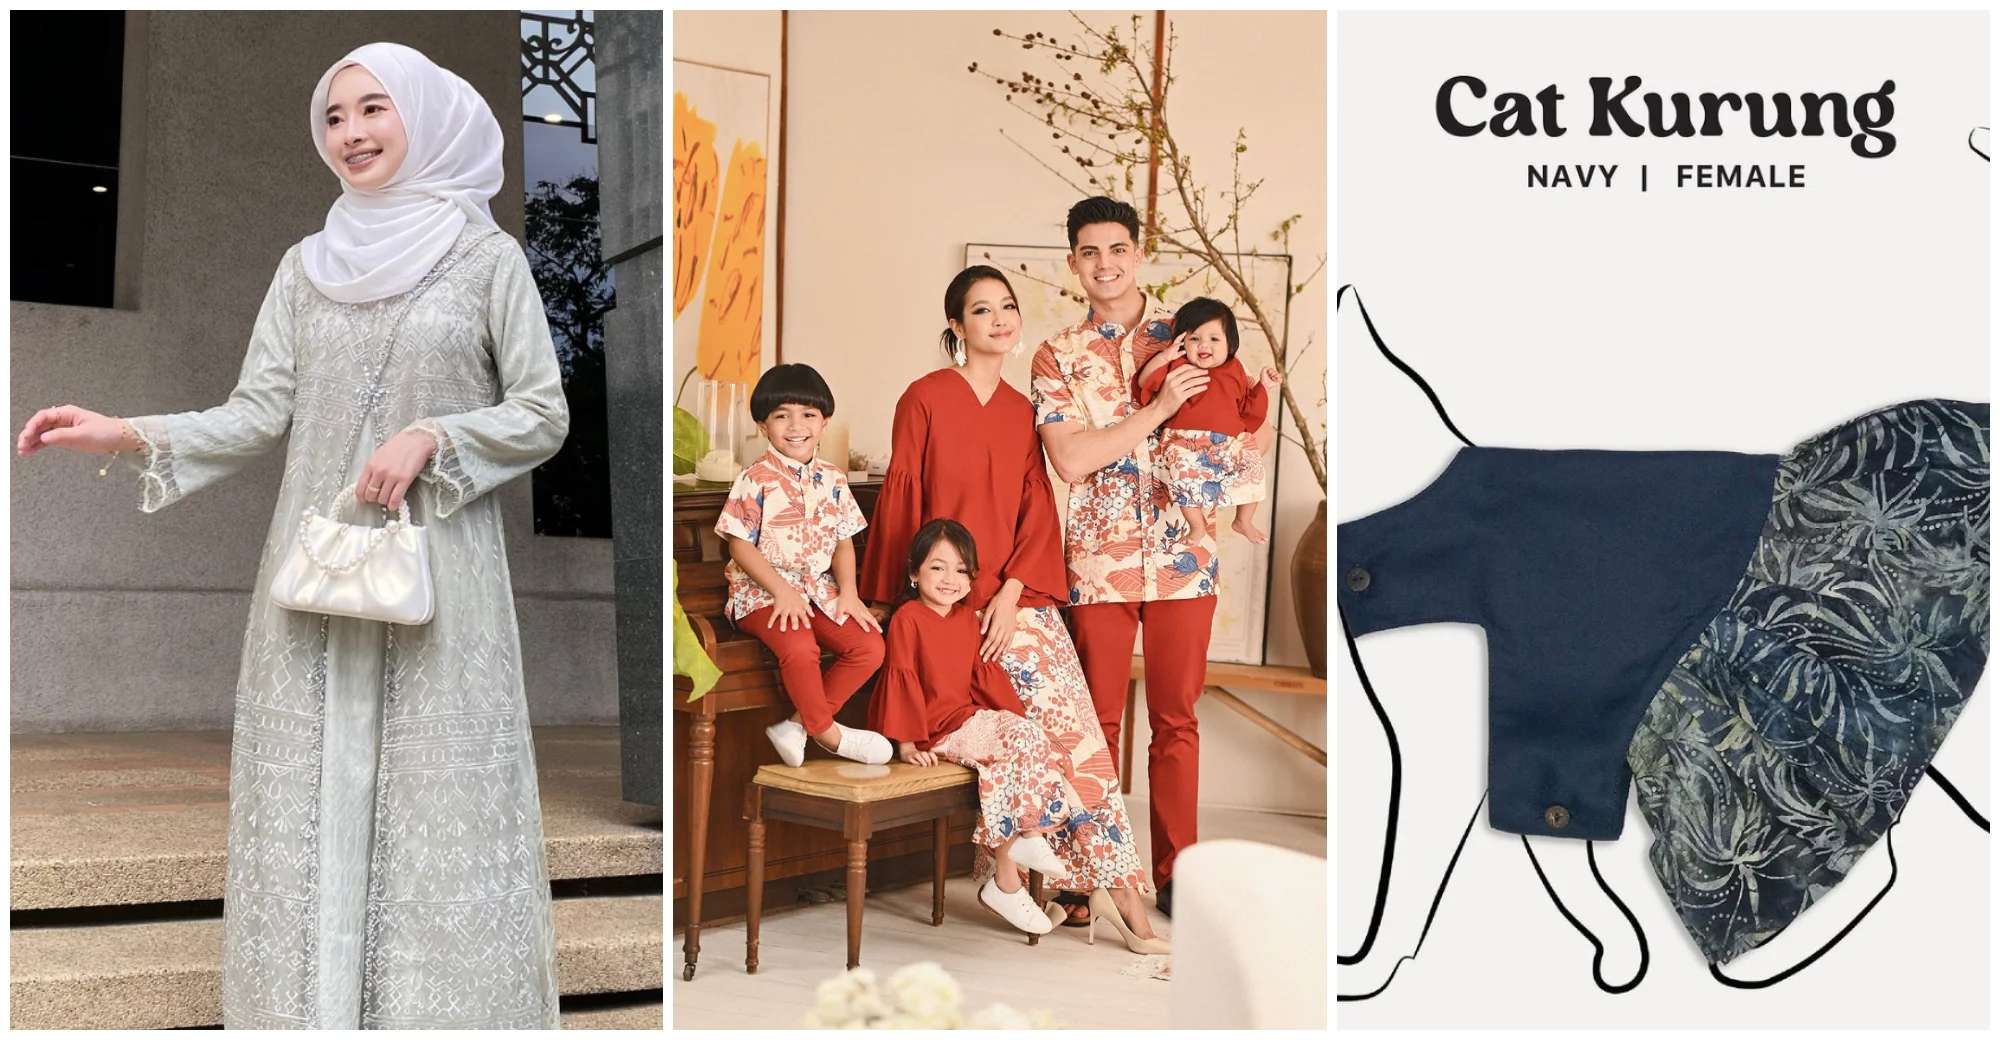 The Ultimate Baju Raya List For Men, Women, Kids and Cats